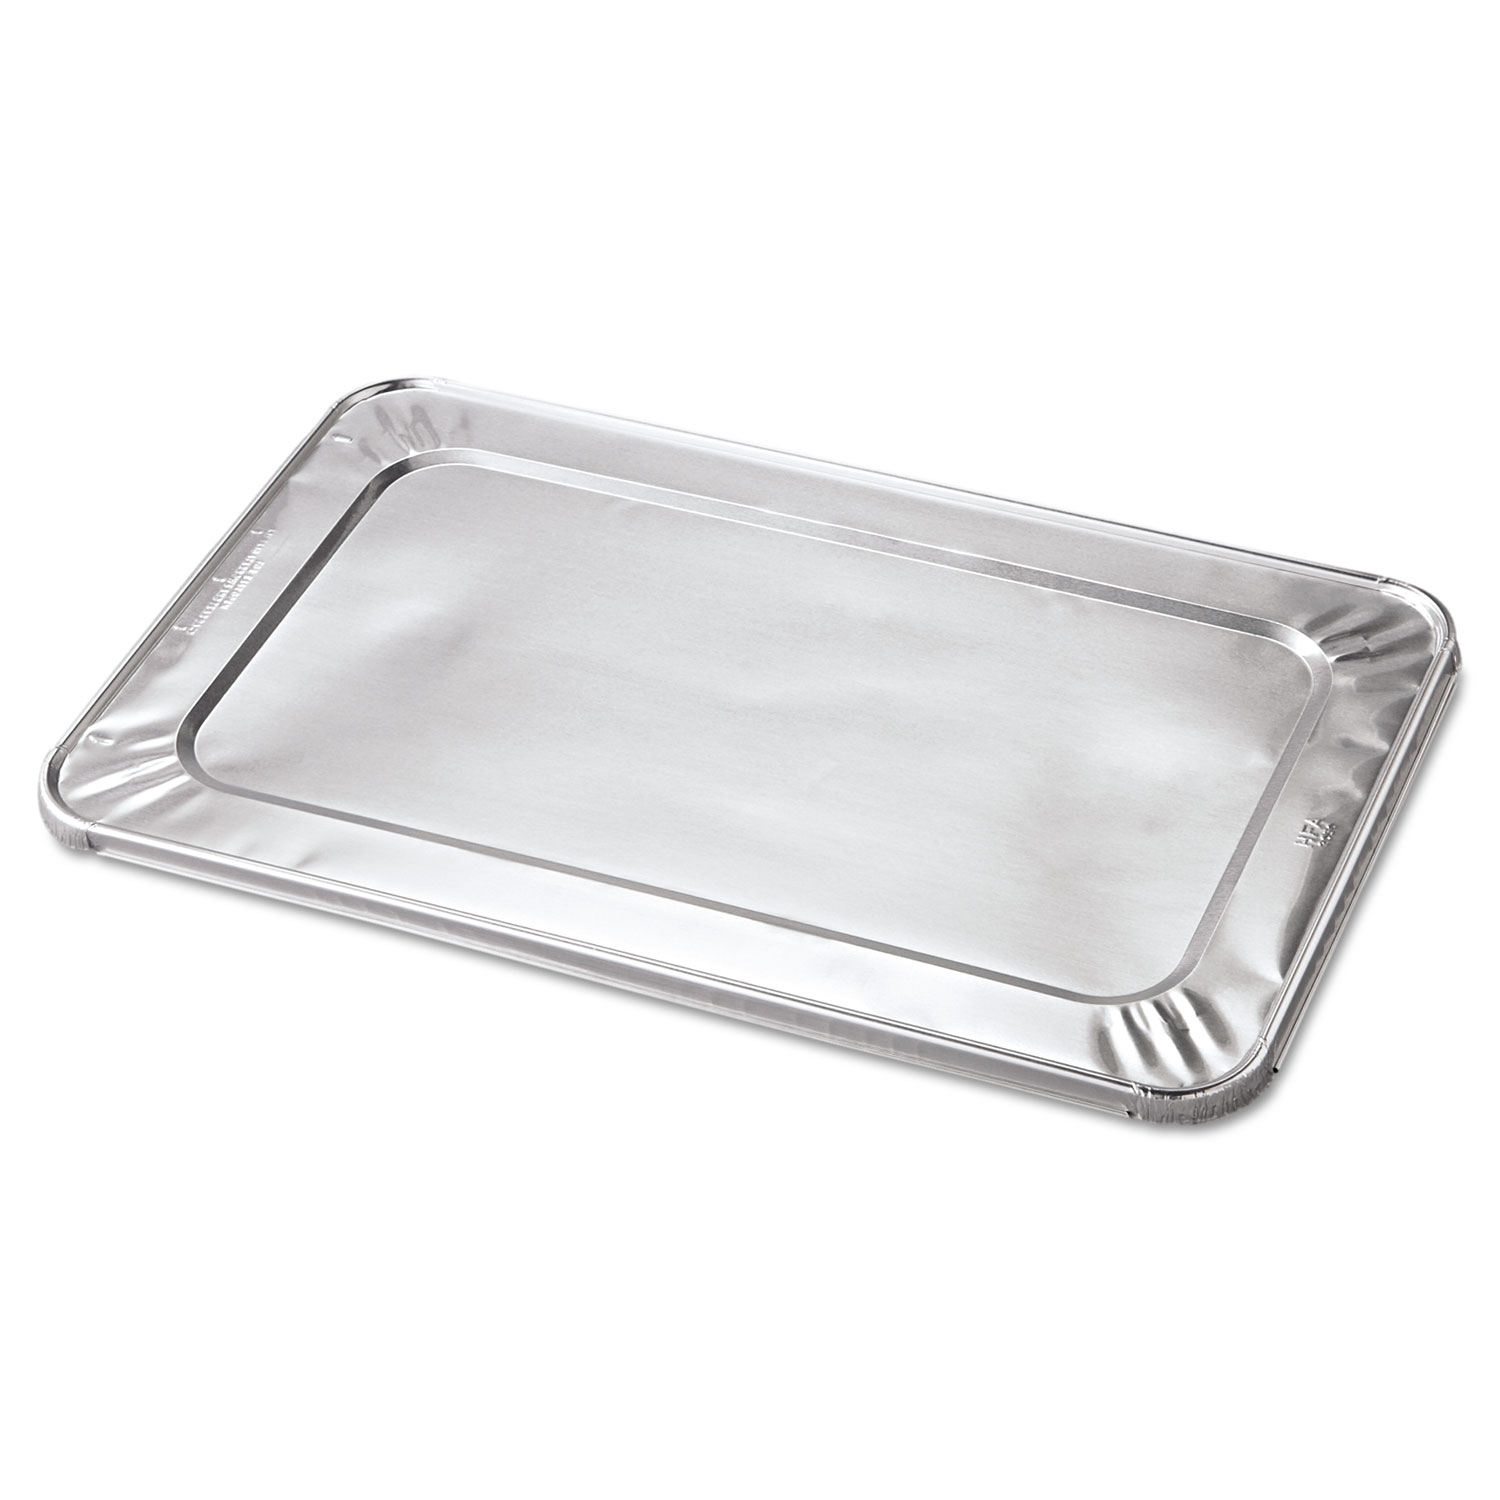 Steam Table Pan Foil Lid, Fits Full Size Pan, 20 13/16 x 12